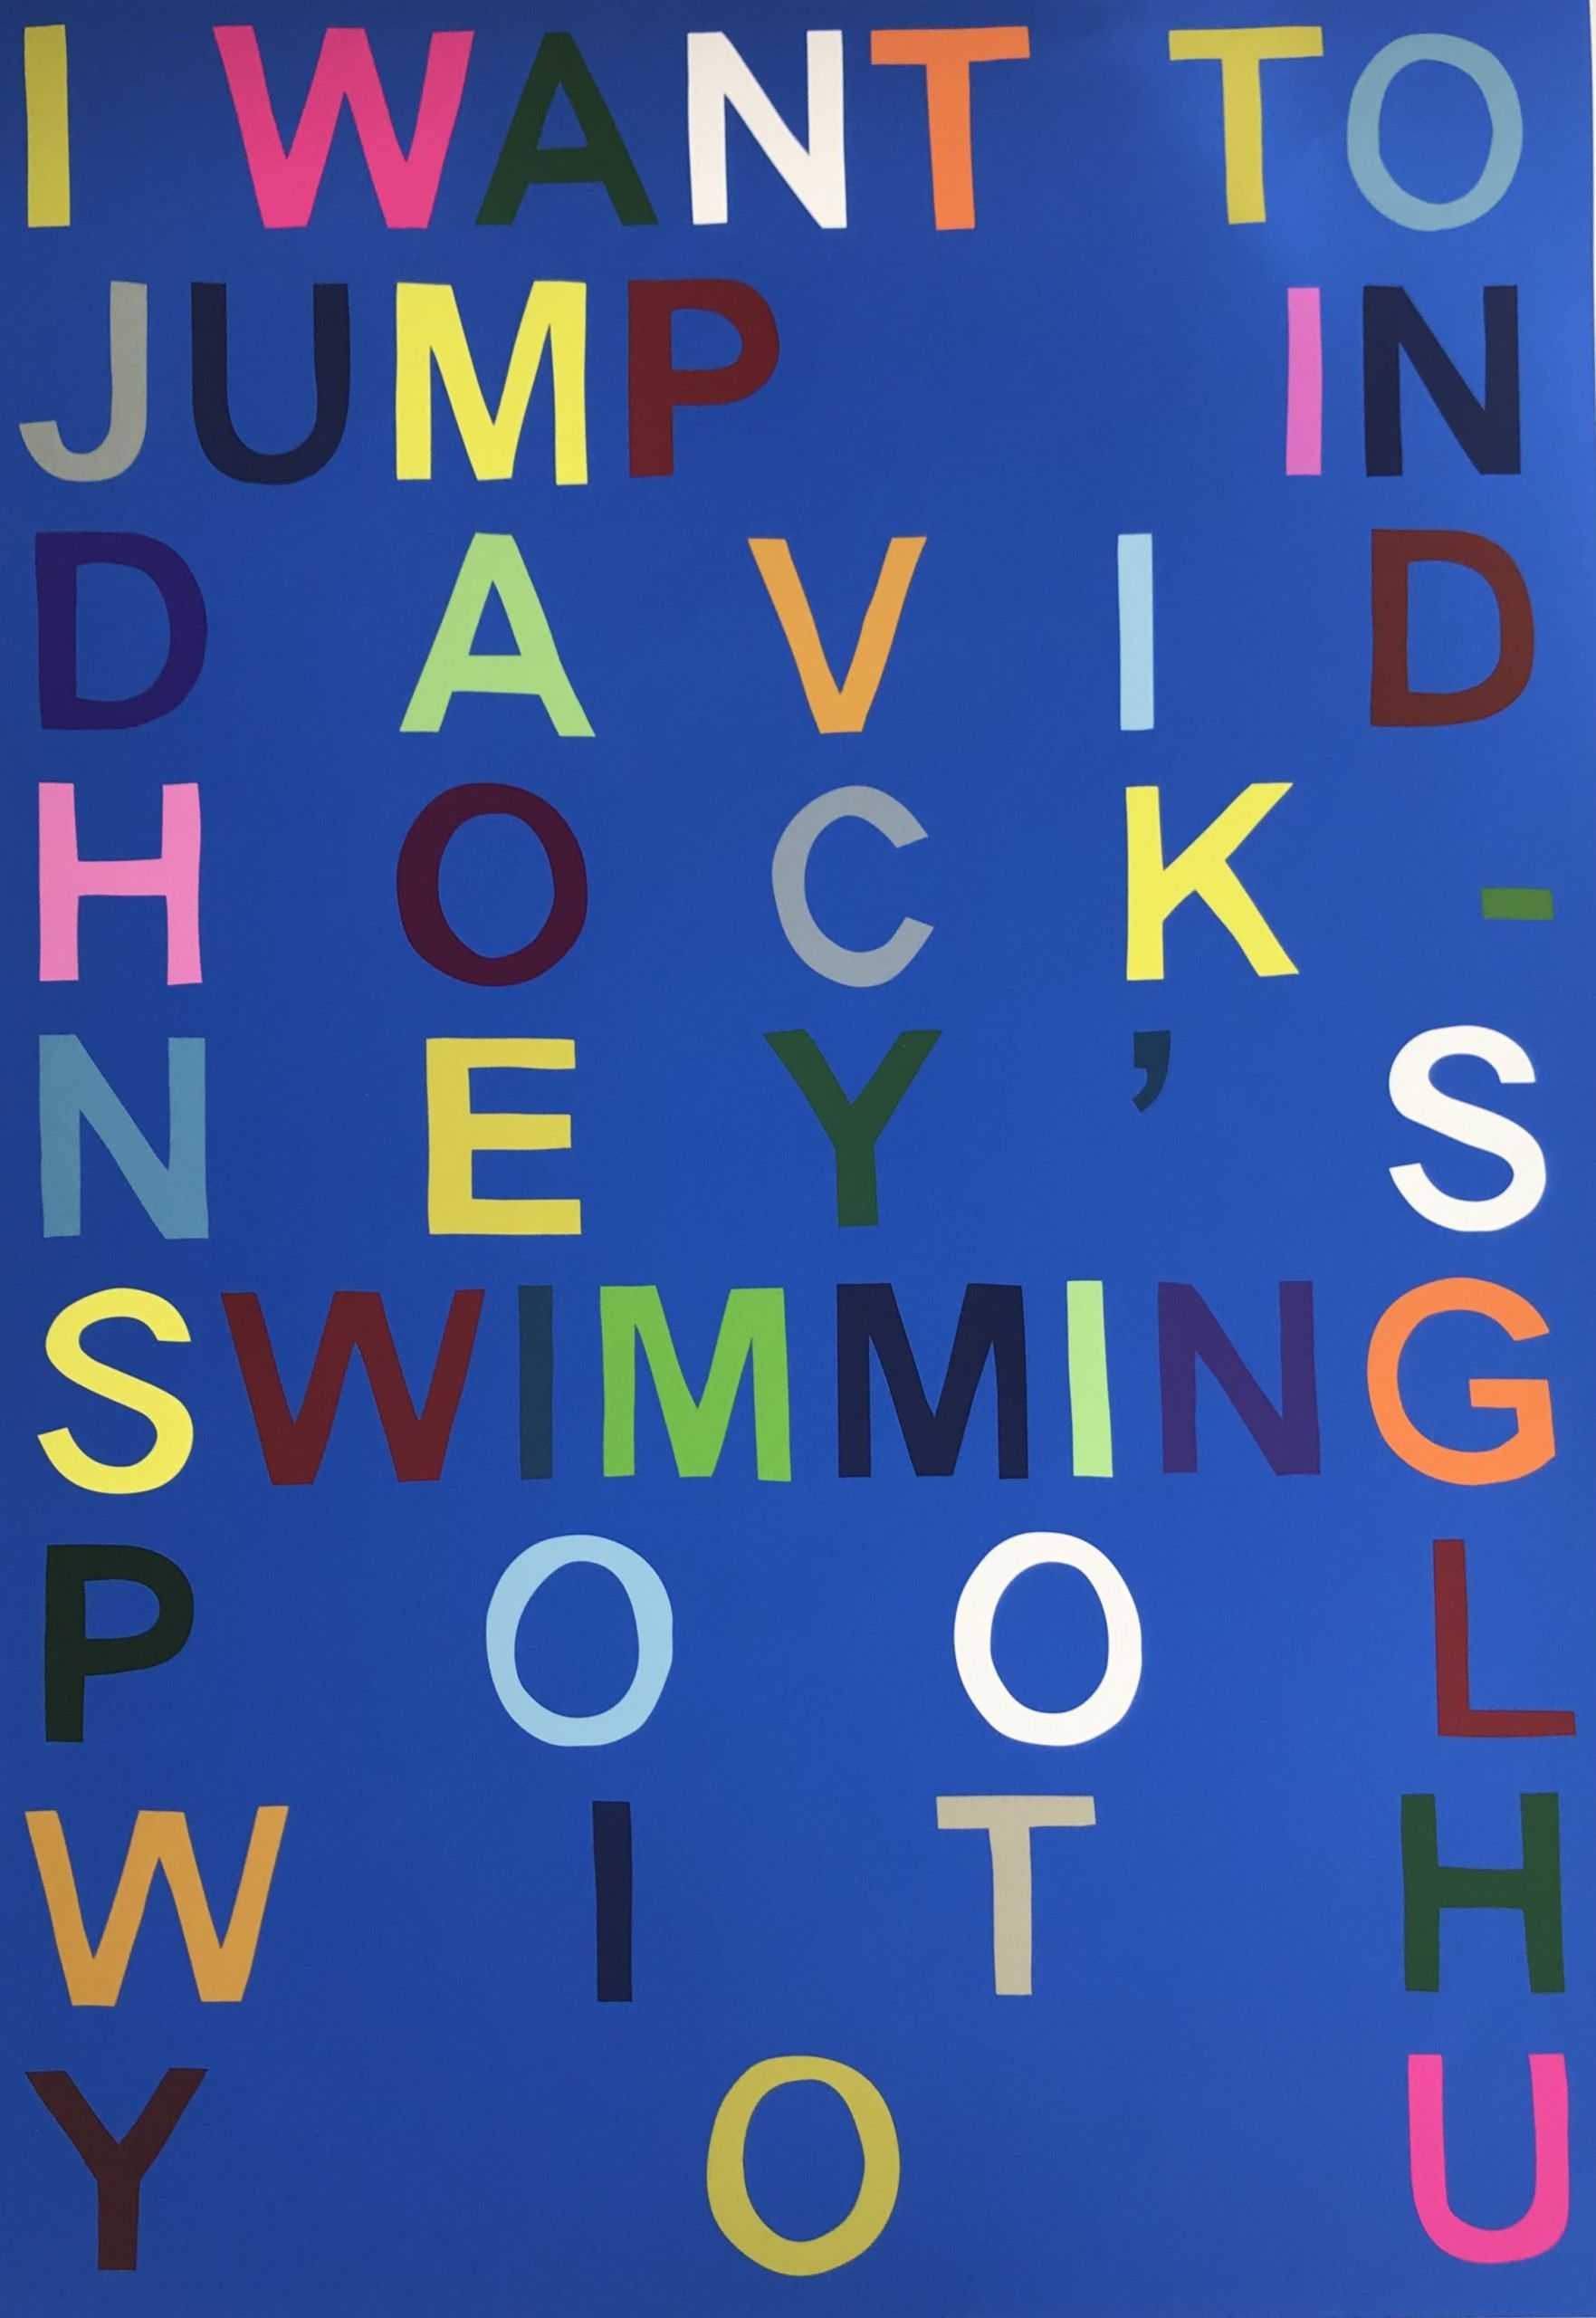 I Want to Jump in David Hockney's Swimming Pool with You (Blue) by Benjamin Thomas Taylor